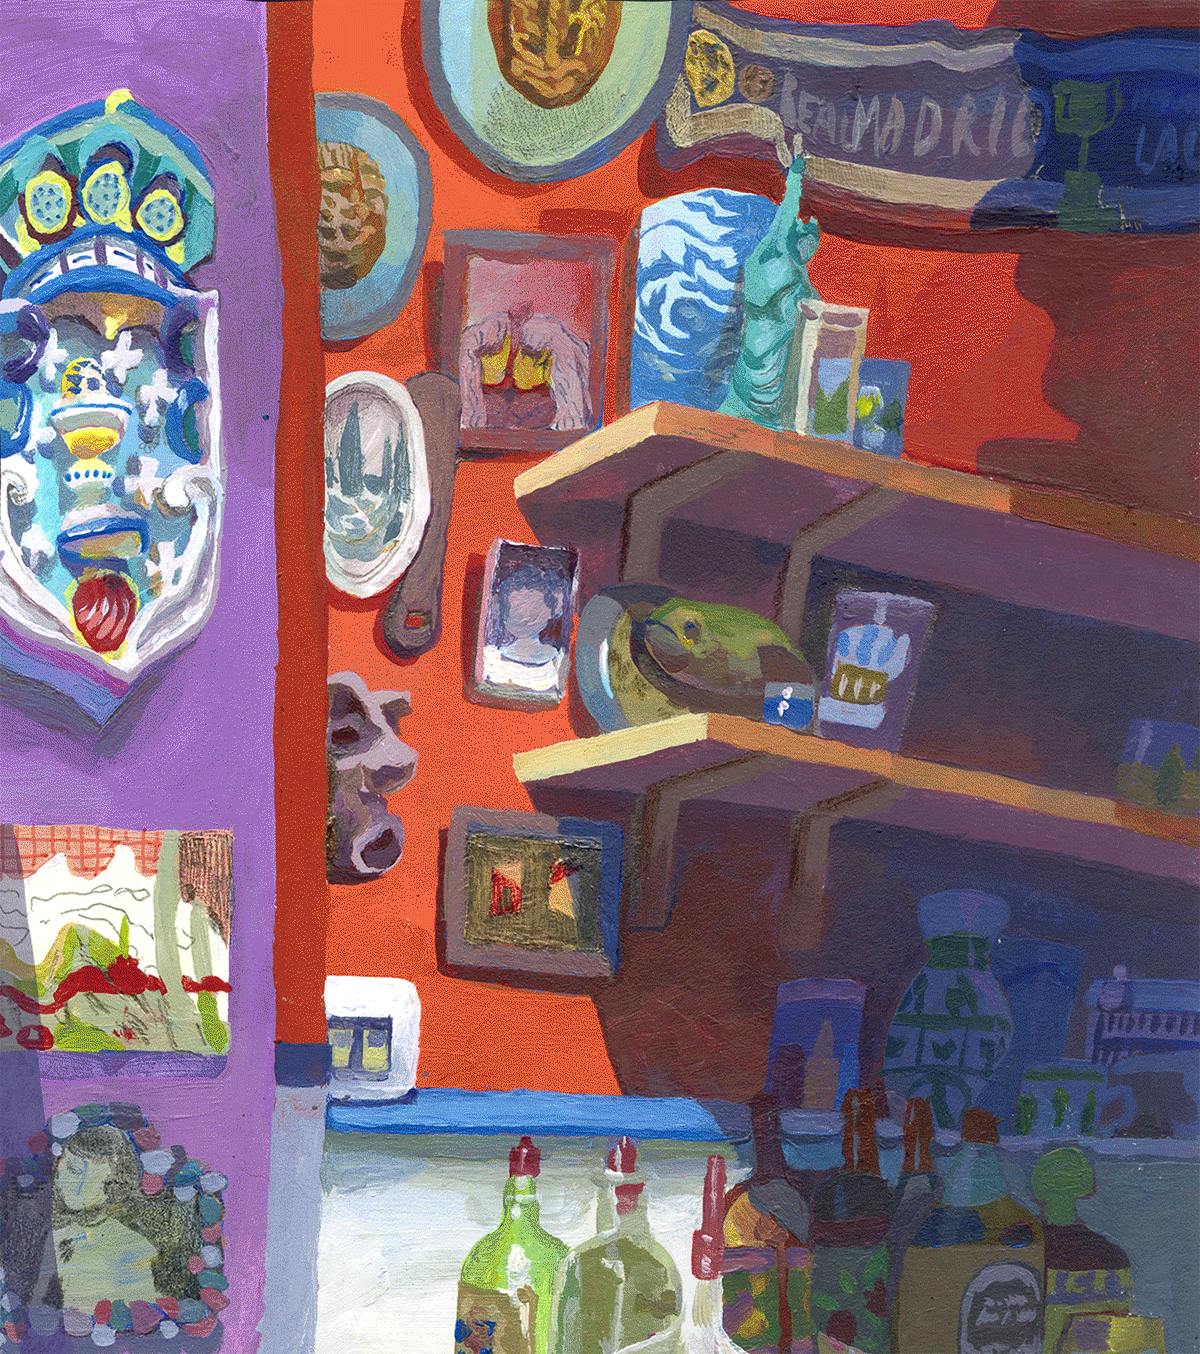 Animated gif of a detailed wall with shelves and knick knacks on it, two femme shadows appear and move from left to right, one pulling the other out of frame